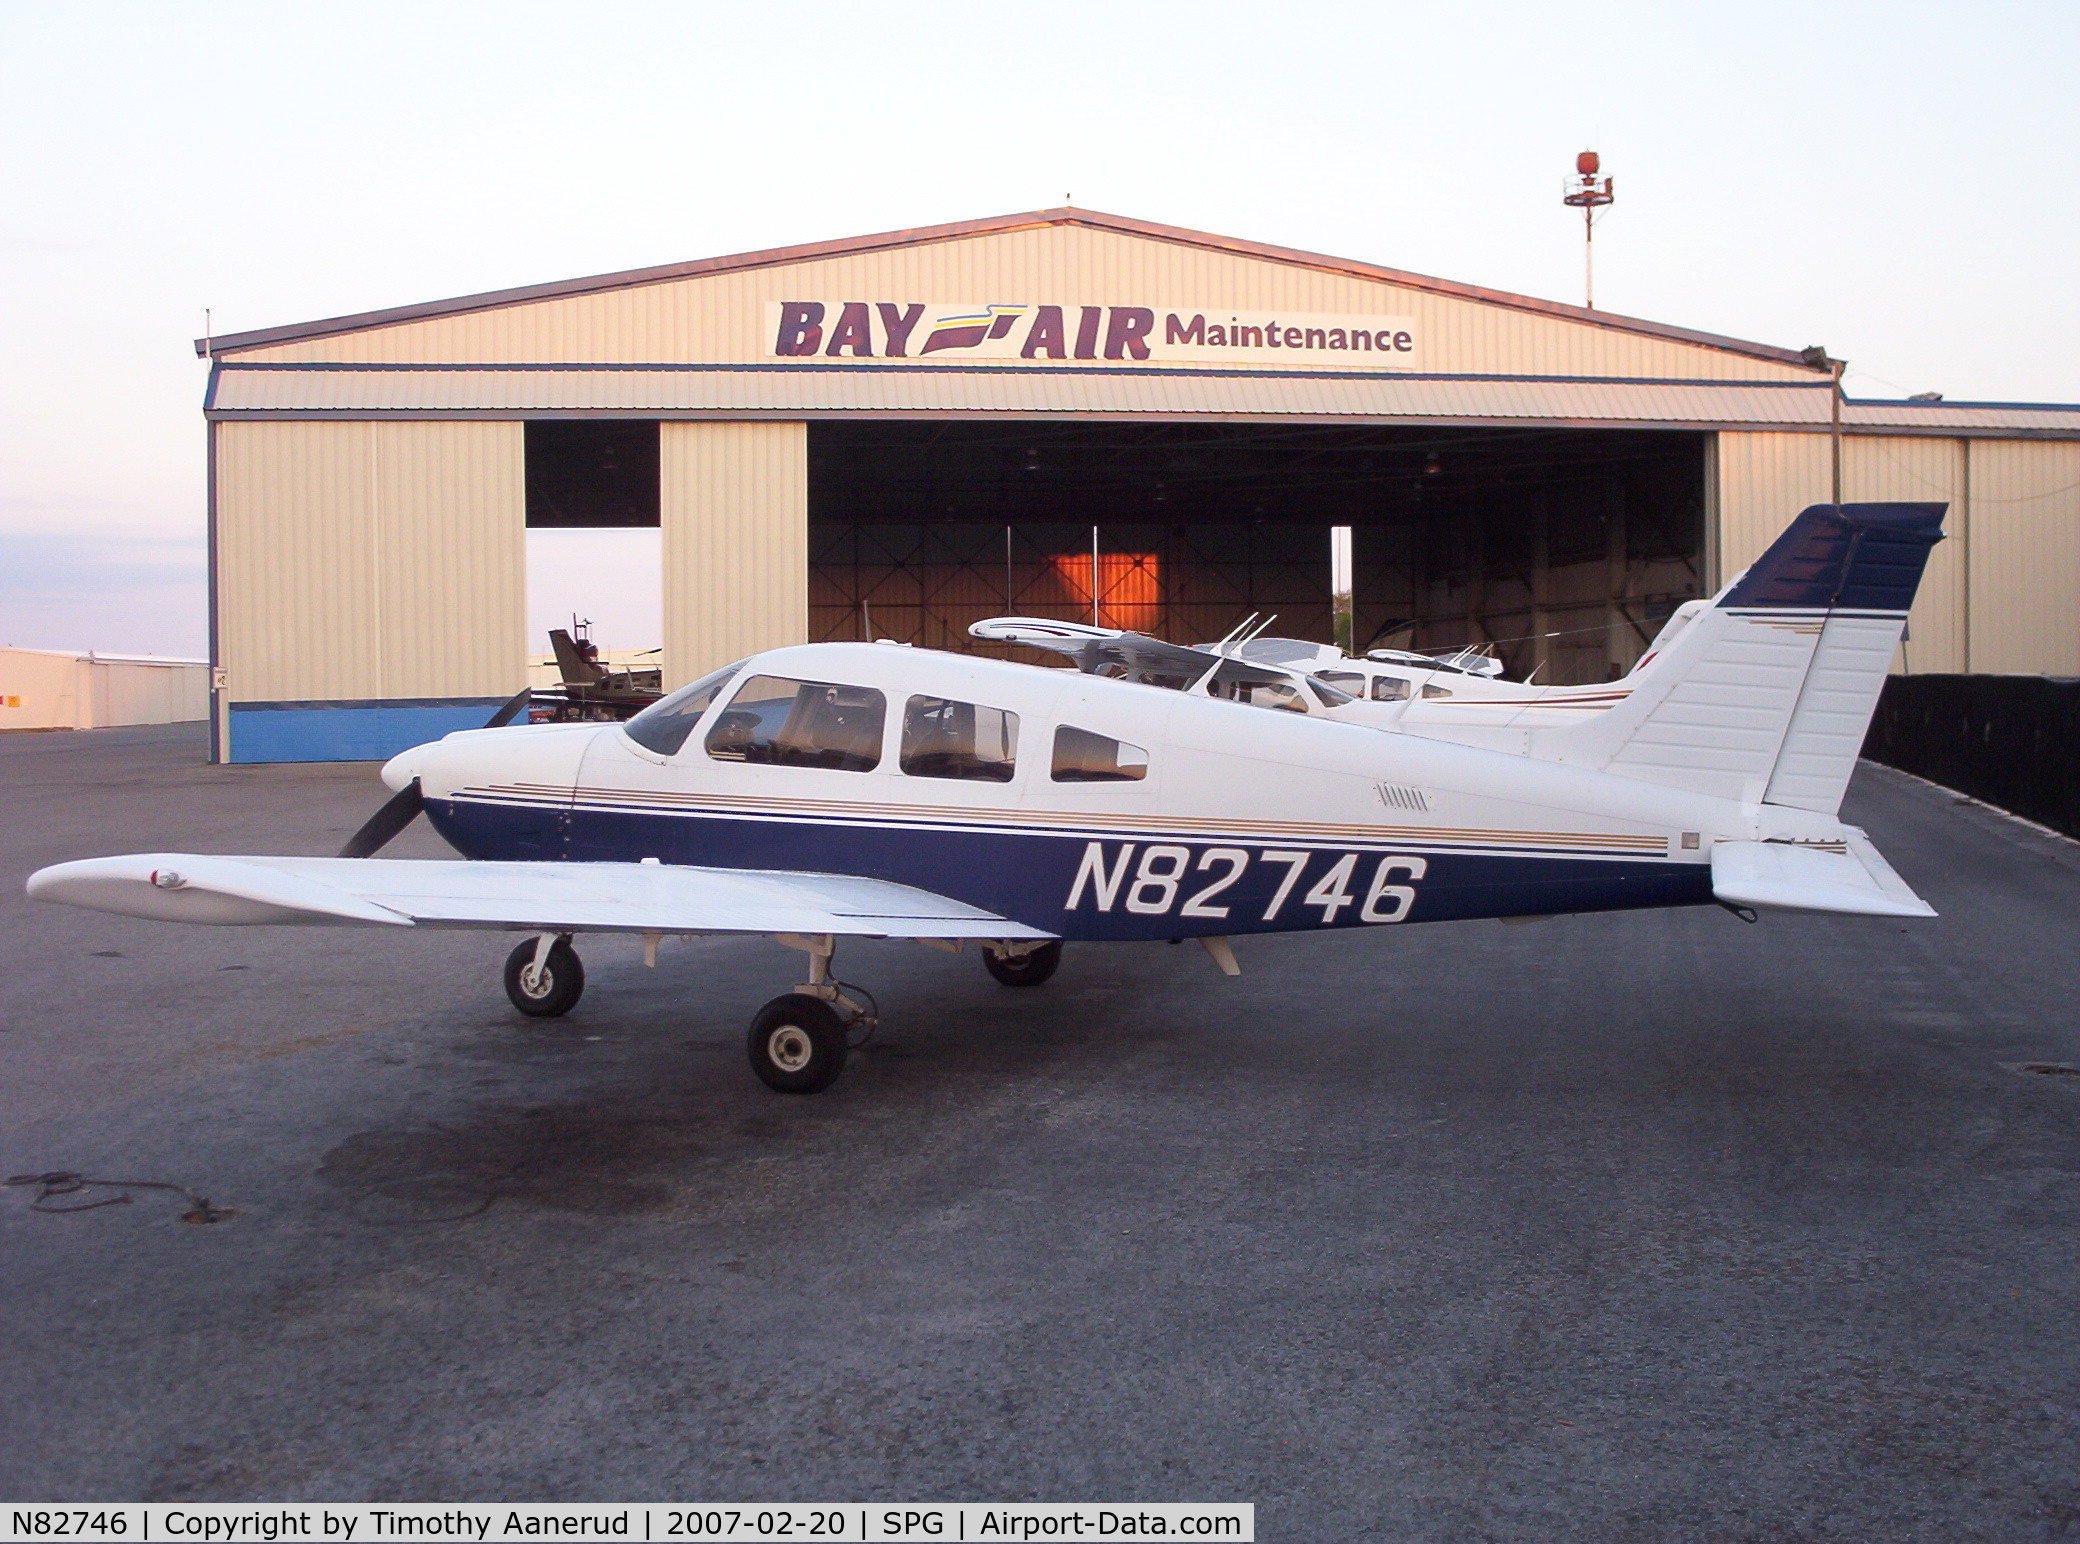 N82746, 1980 Piper PA-28-181 C/N 28-8190054, Parked at Albert Whitted Airport, 1980 Piper PA-28-181, c/n 28-8190054